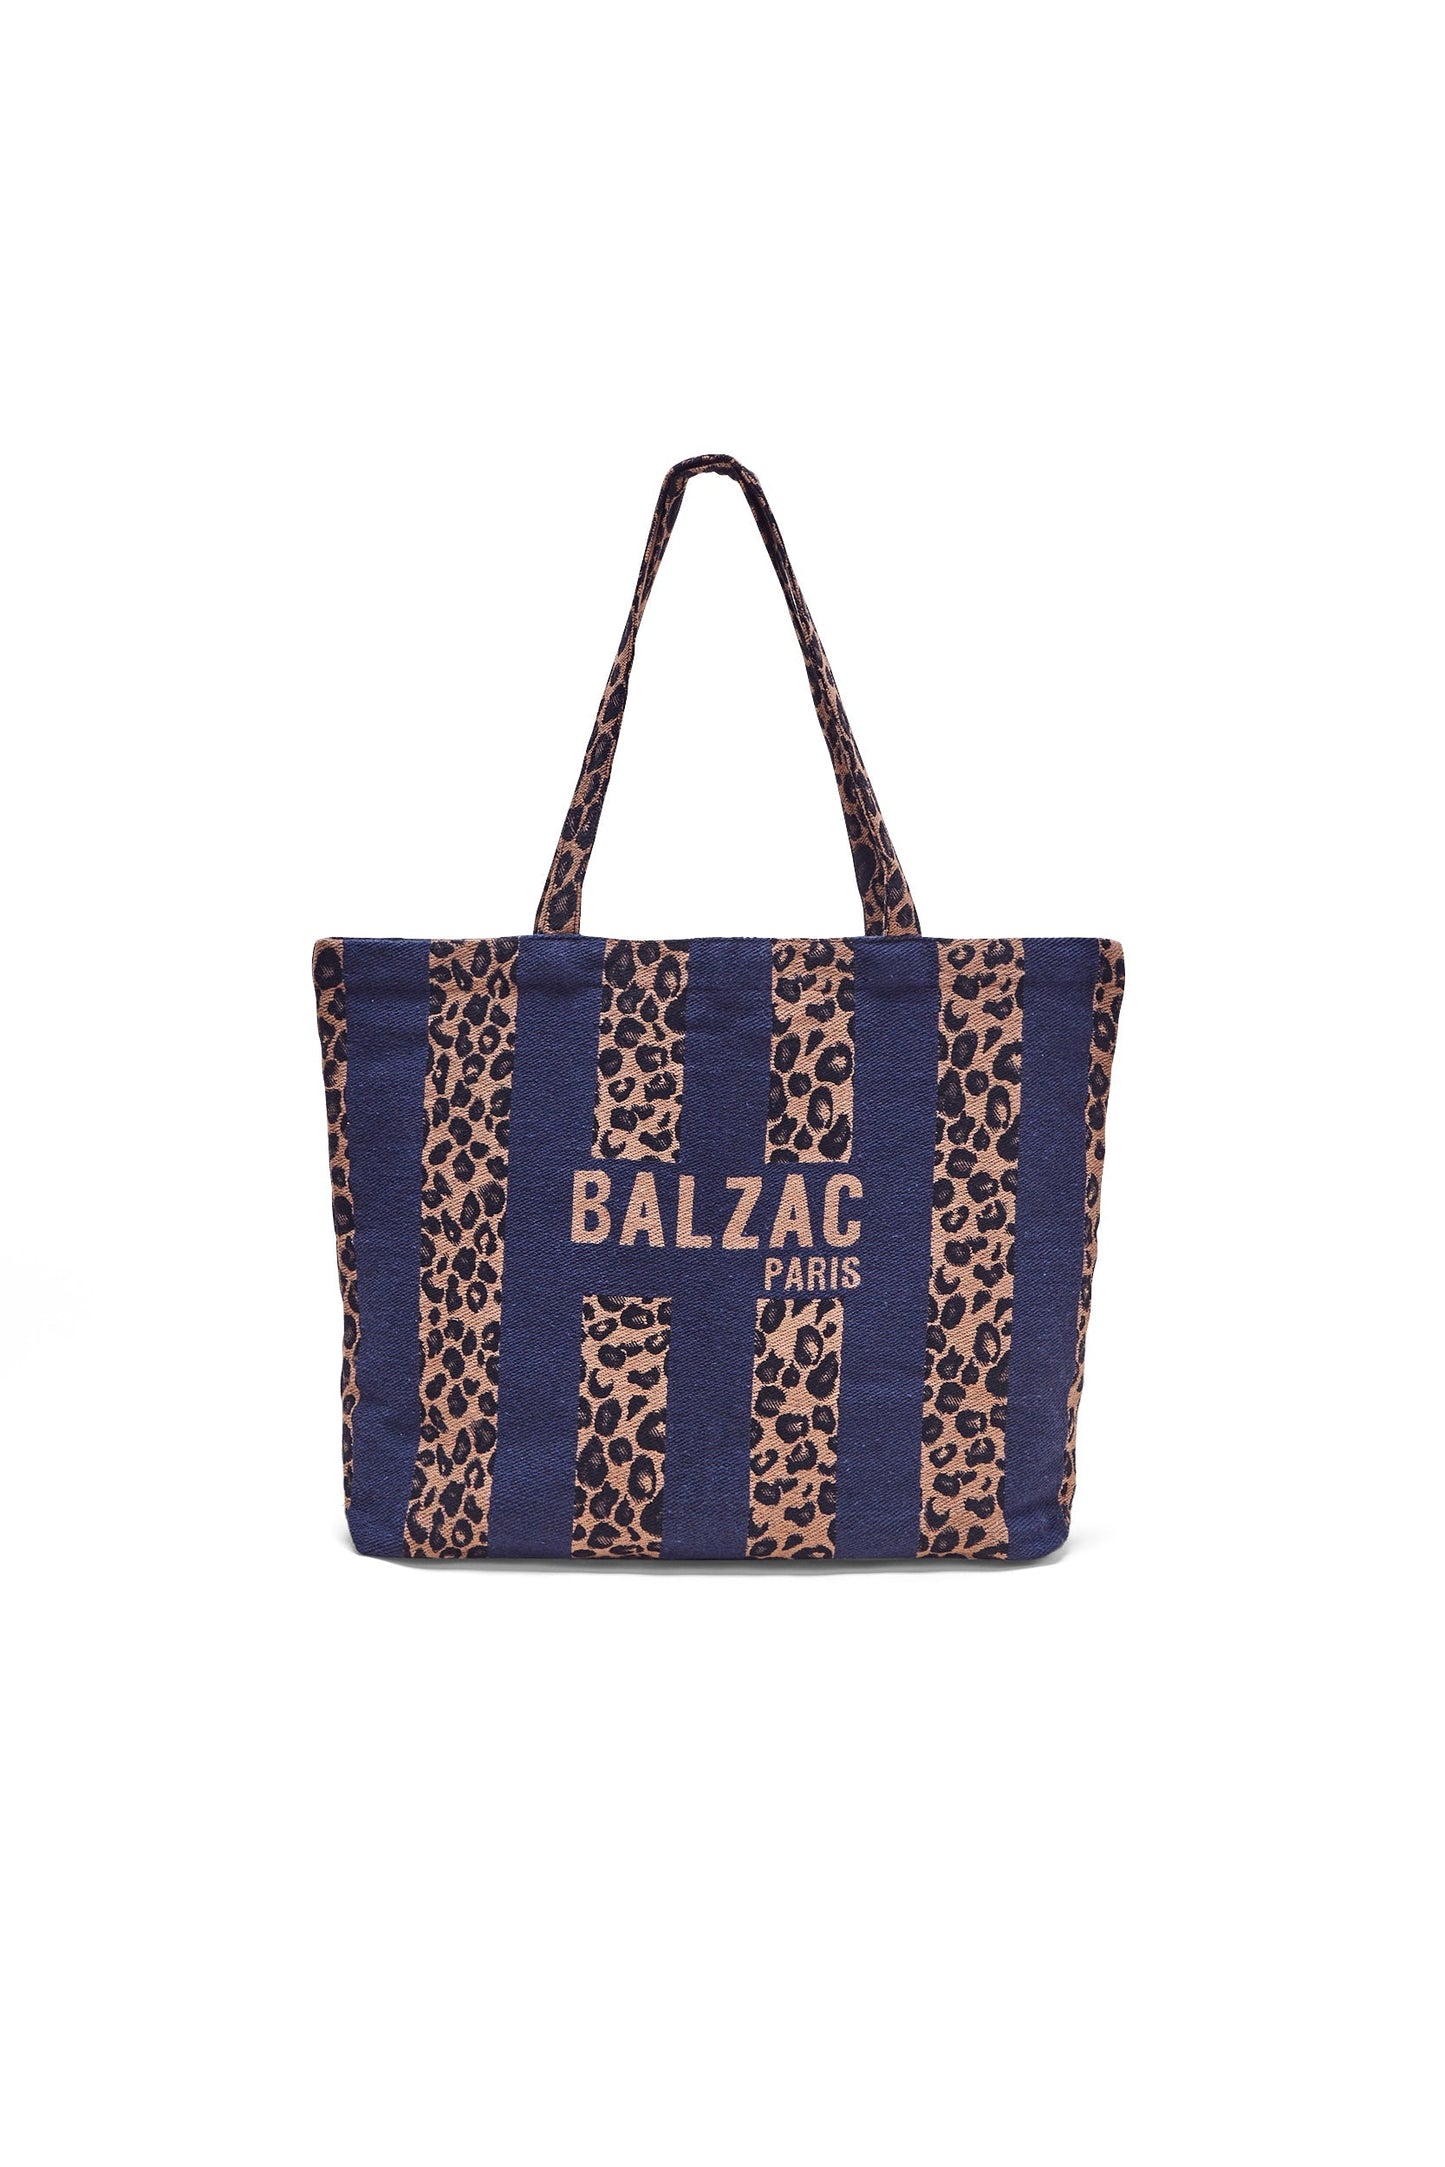 Navy and leopard striped tote bag